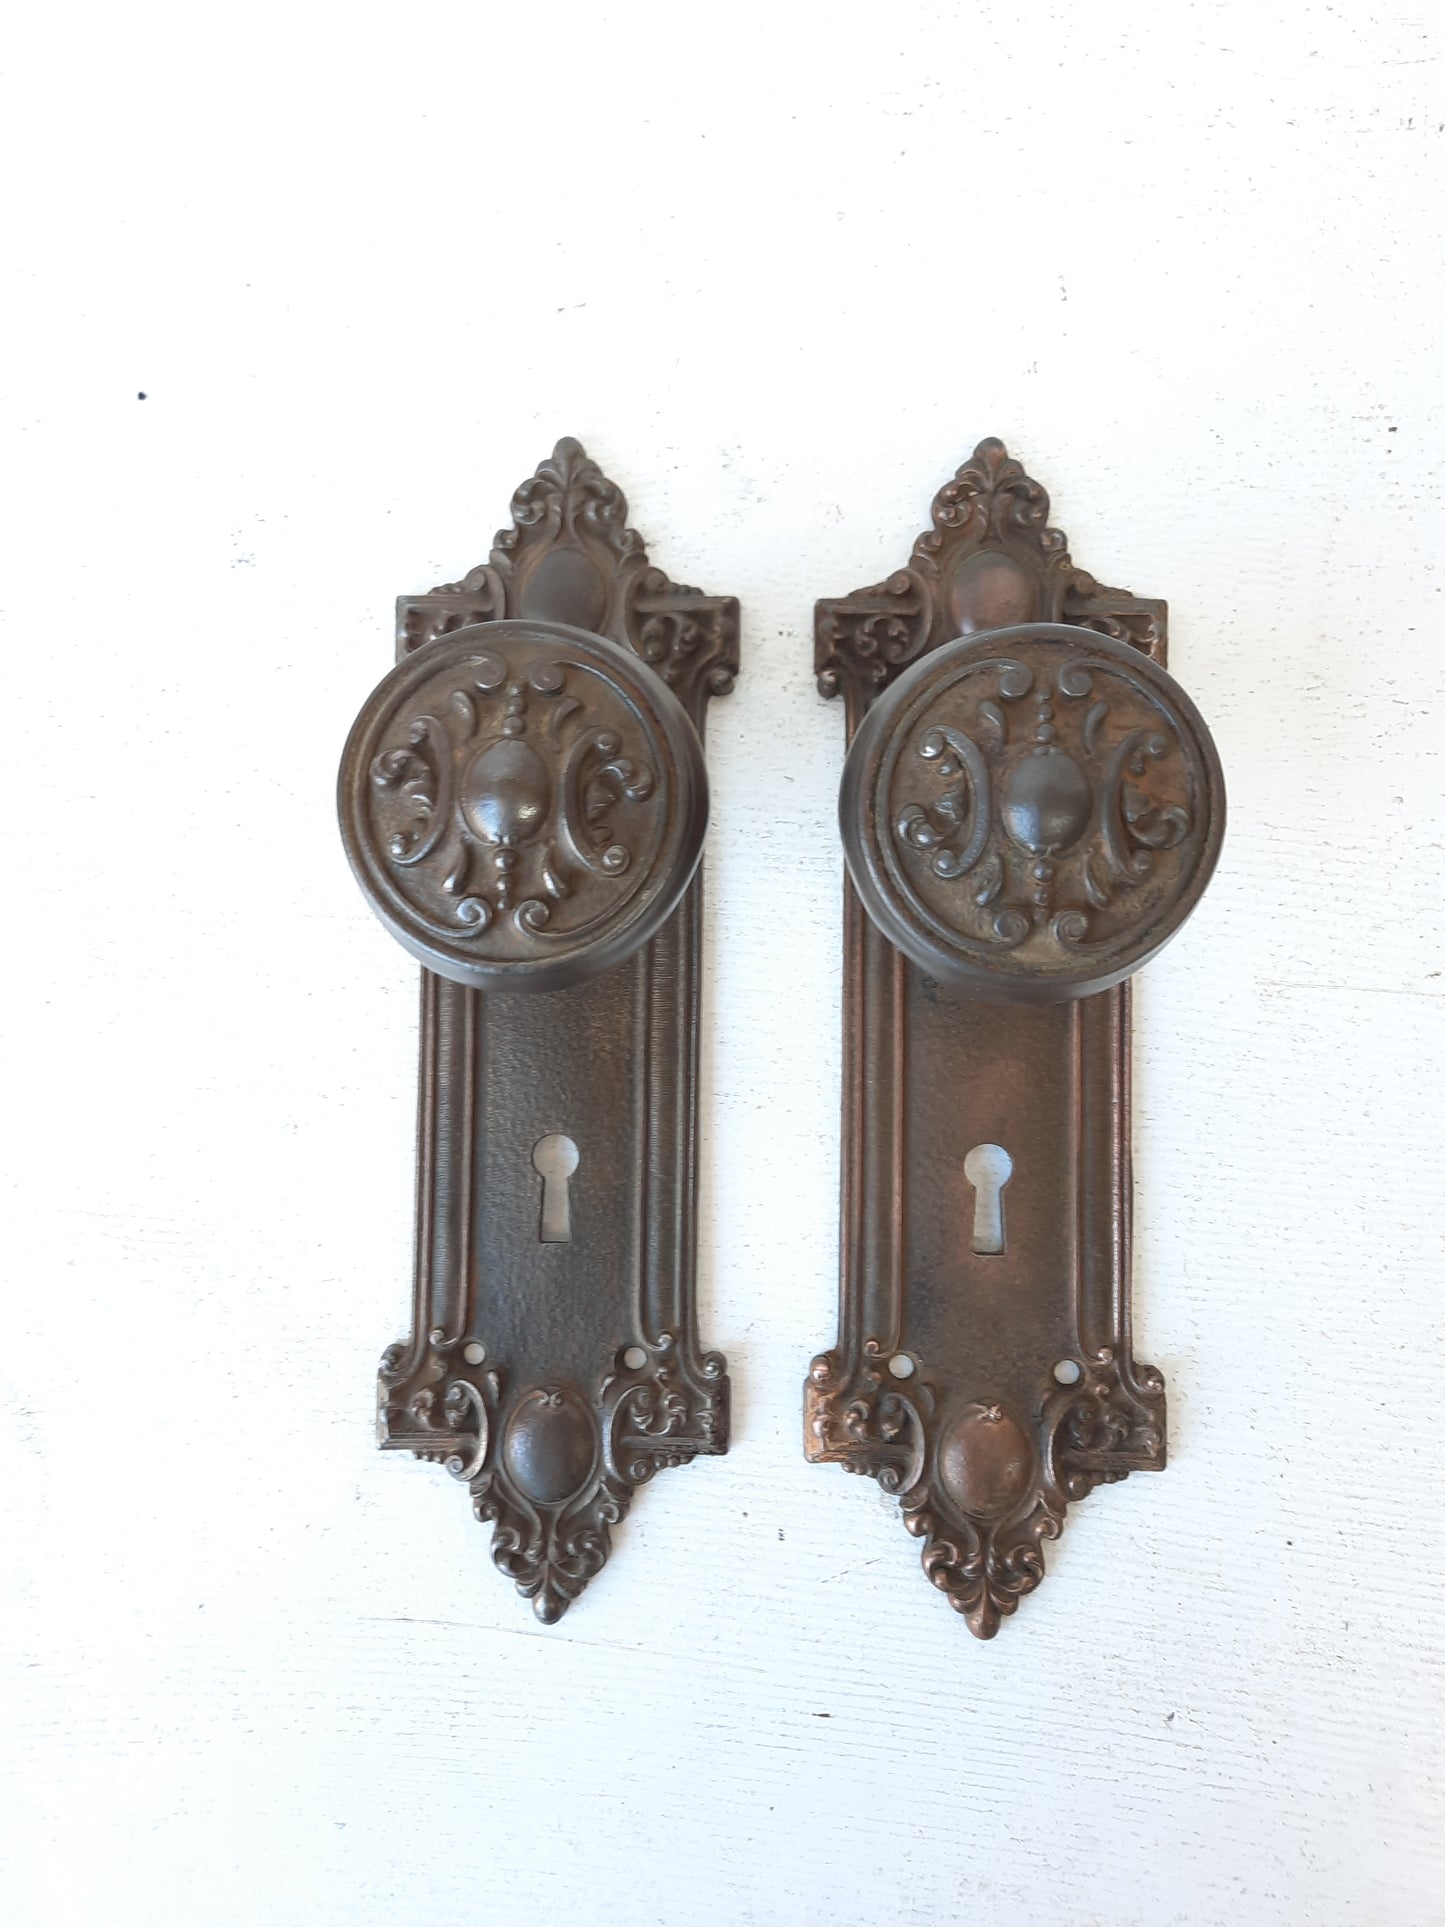 Reole Hardware Set, Reole Pattern Doorknobs and Backplates, Antique Cast Iron Door Hardware, Antique Salvage 100513